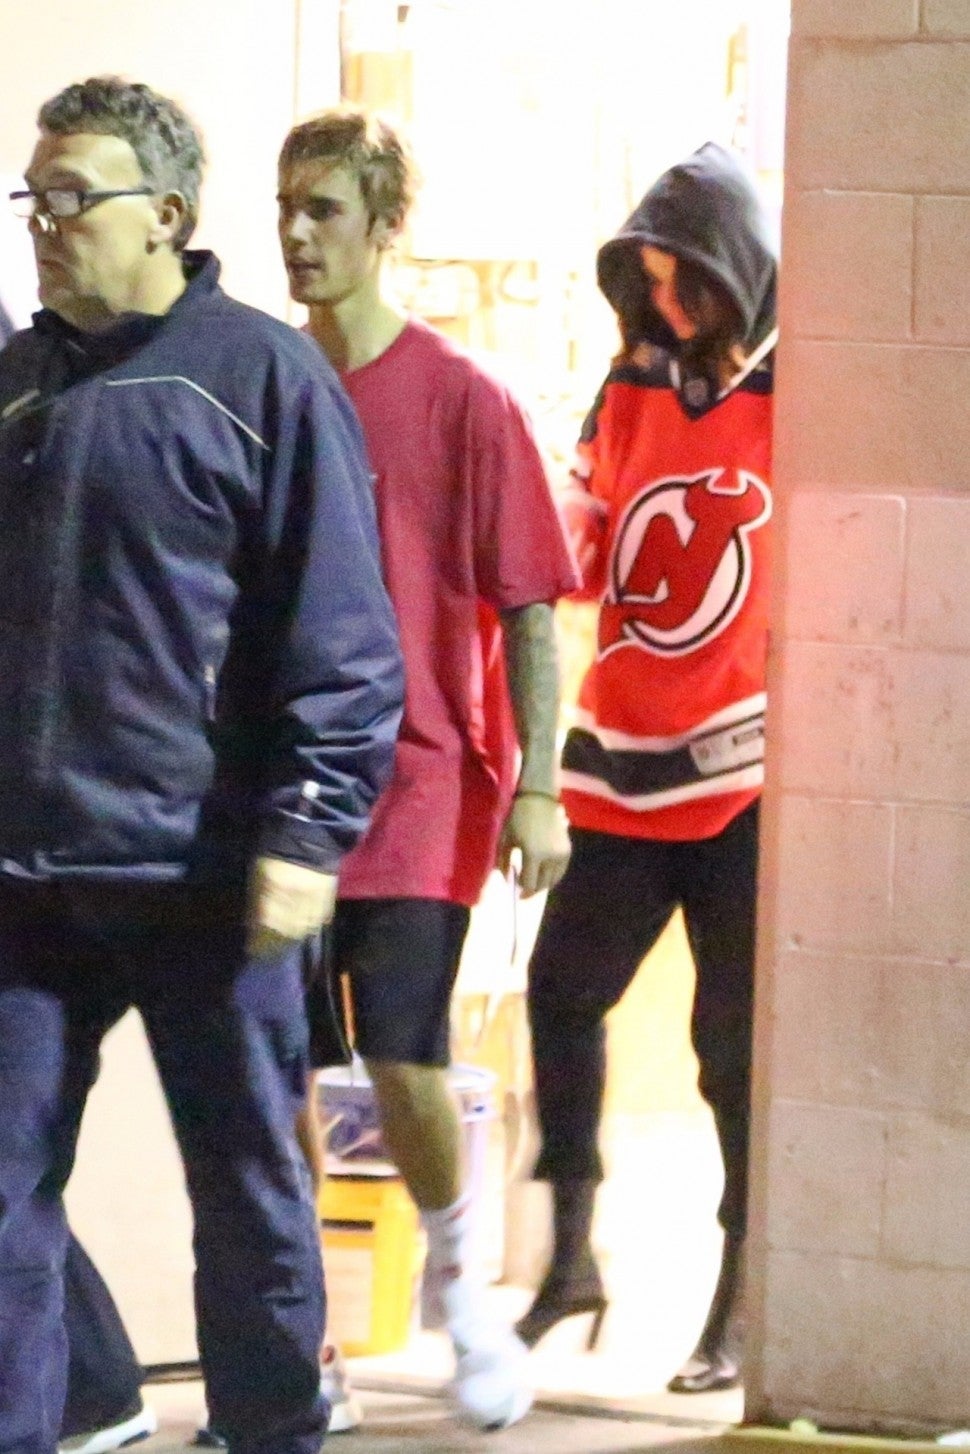 Justin Bieber and Selena Gomez attend his hockey game